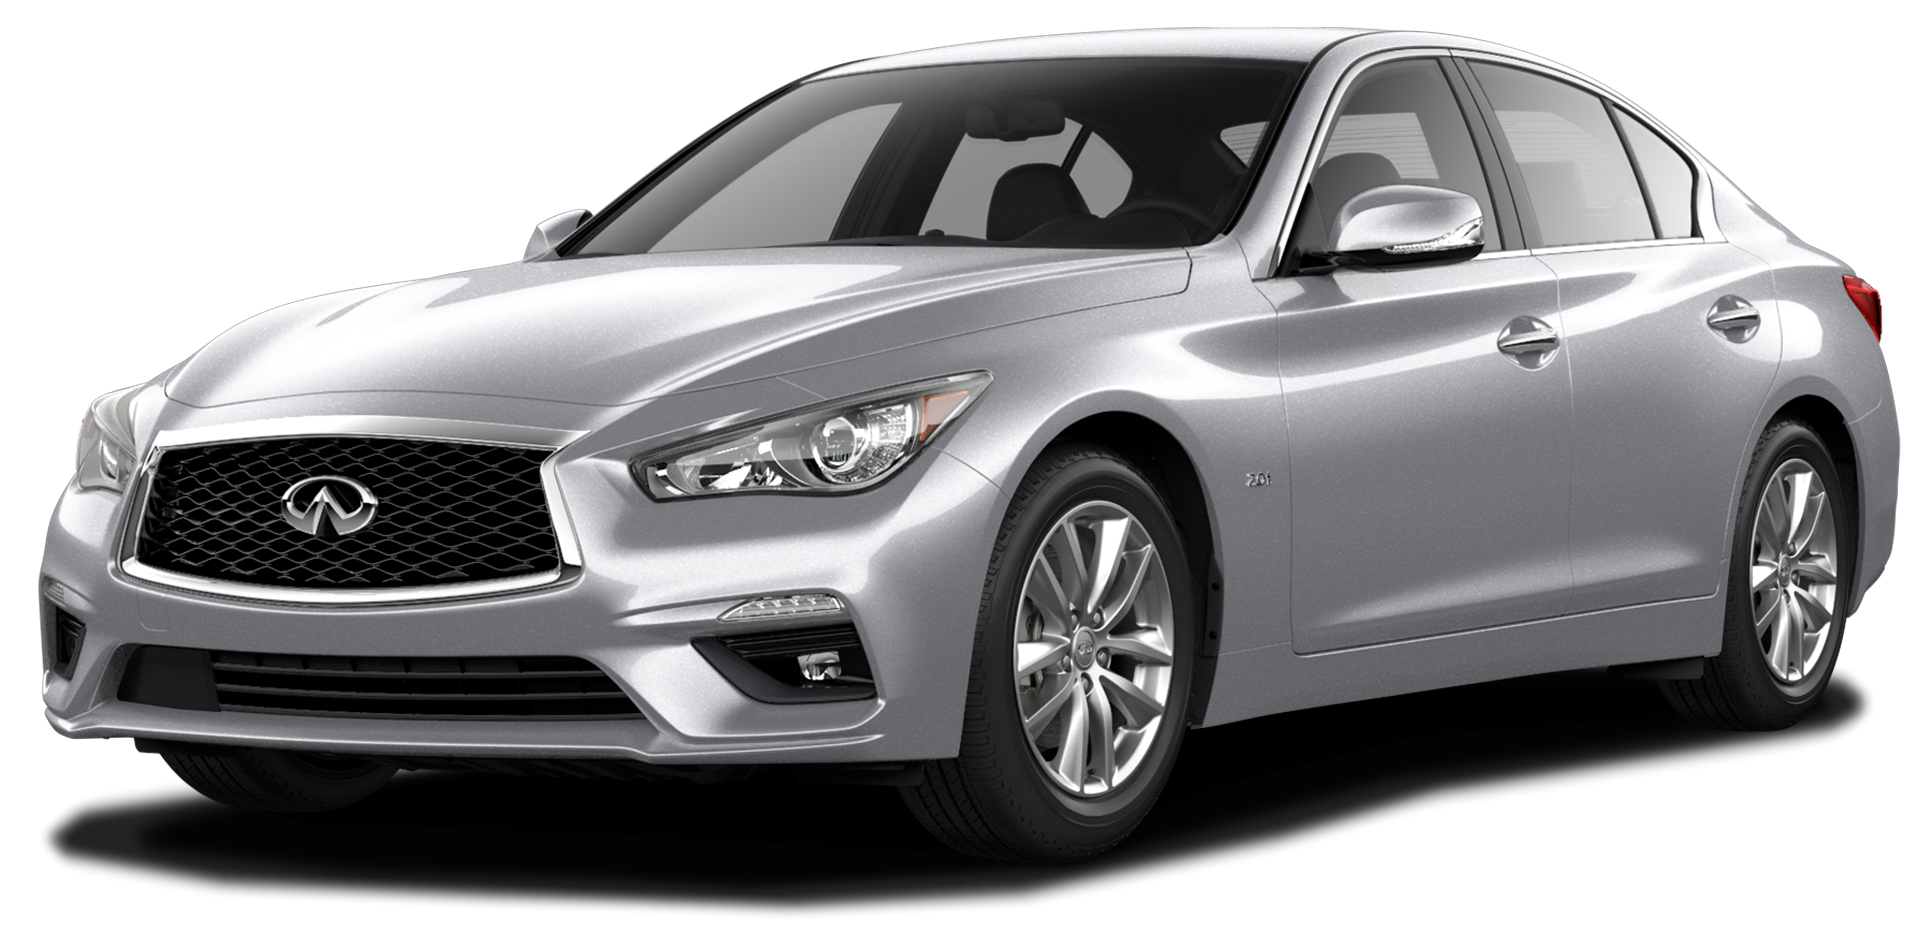 2020-infiniti-q50-incentives-specials-offers-in-creve-coeur-mo